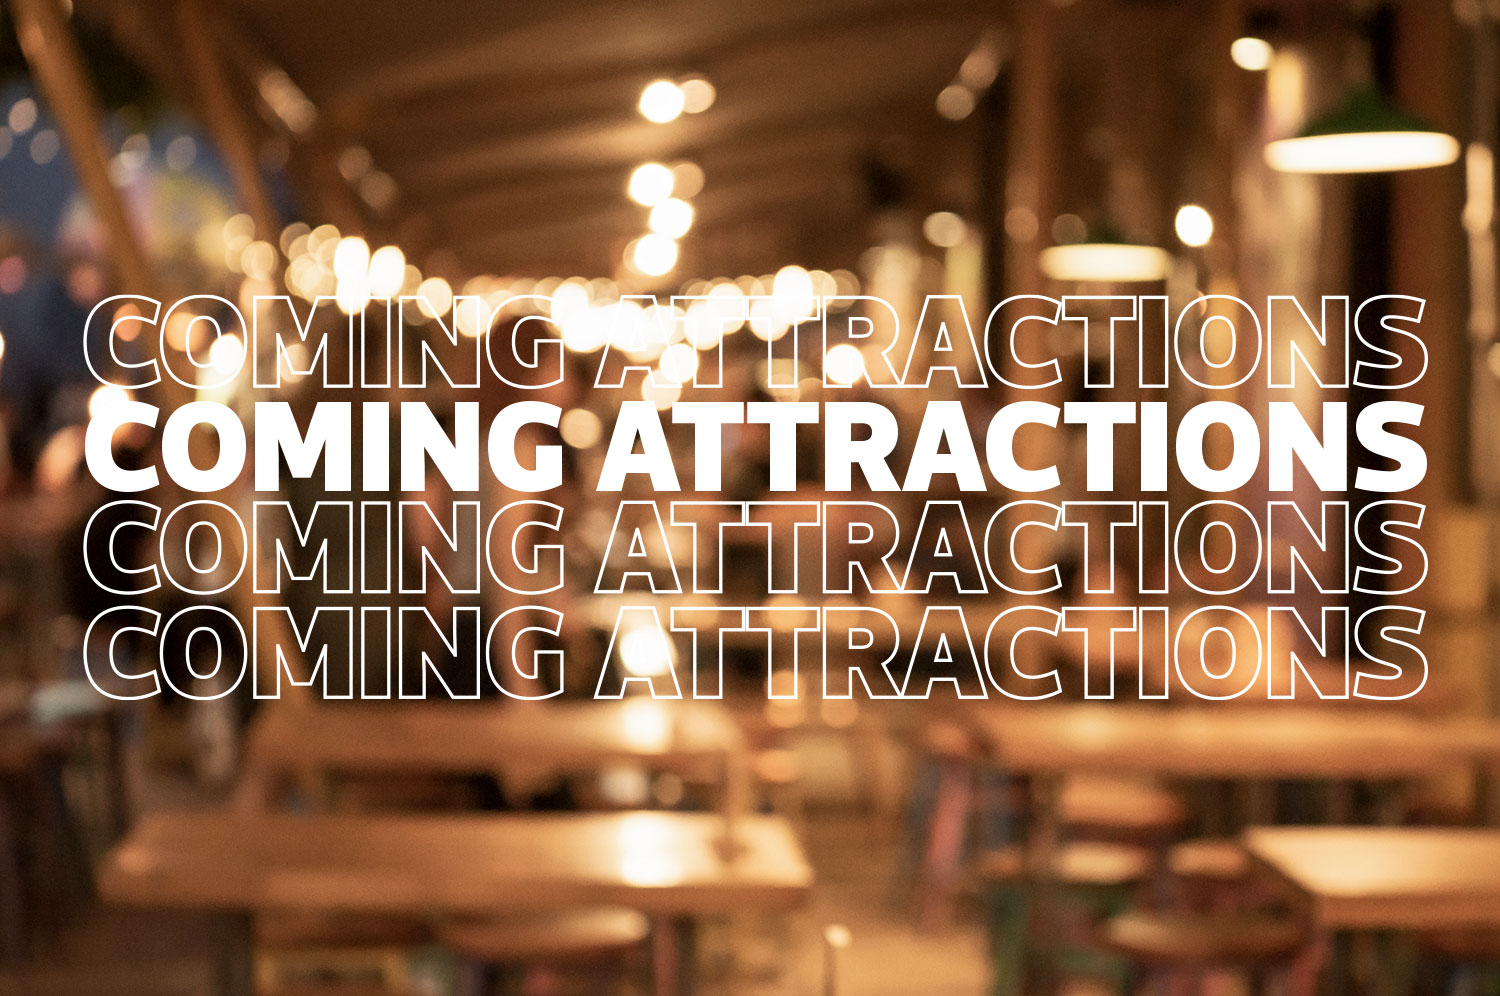 A blurred image of tables and overhanging lighting strings, with the words “coming attractions” graphically overlaid